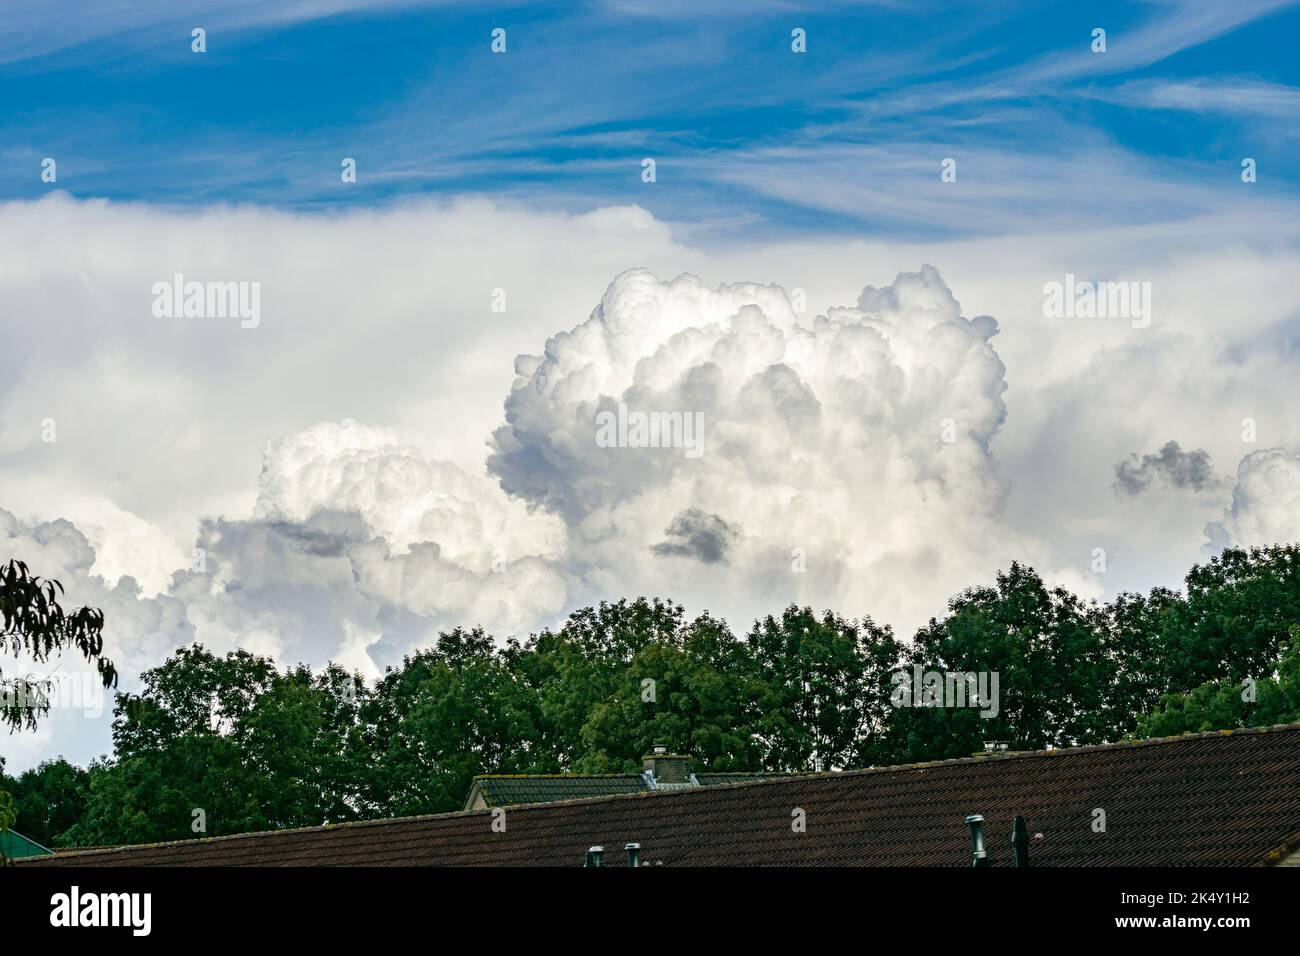 Massive towering cumulus clouds, known as cumulus congestus, are developing into storms in the distance Stock Photo